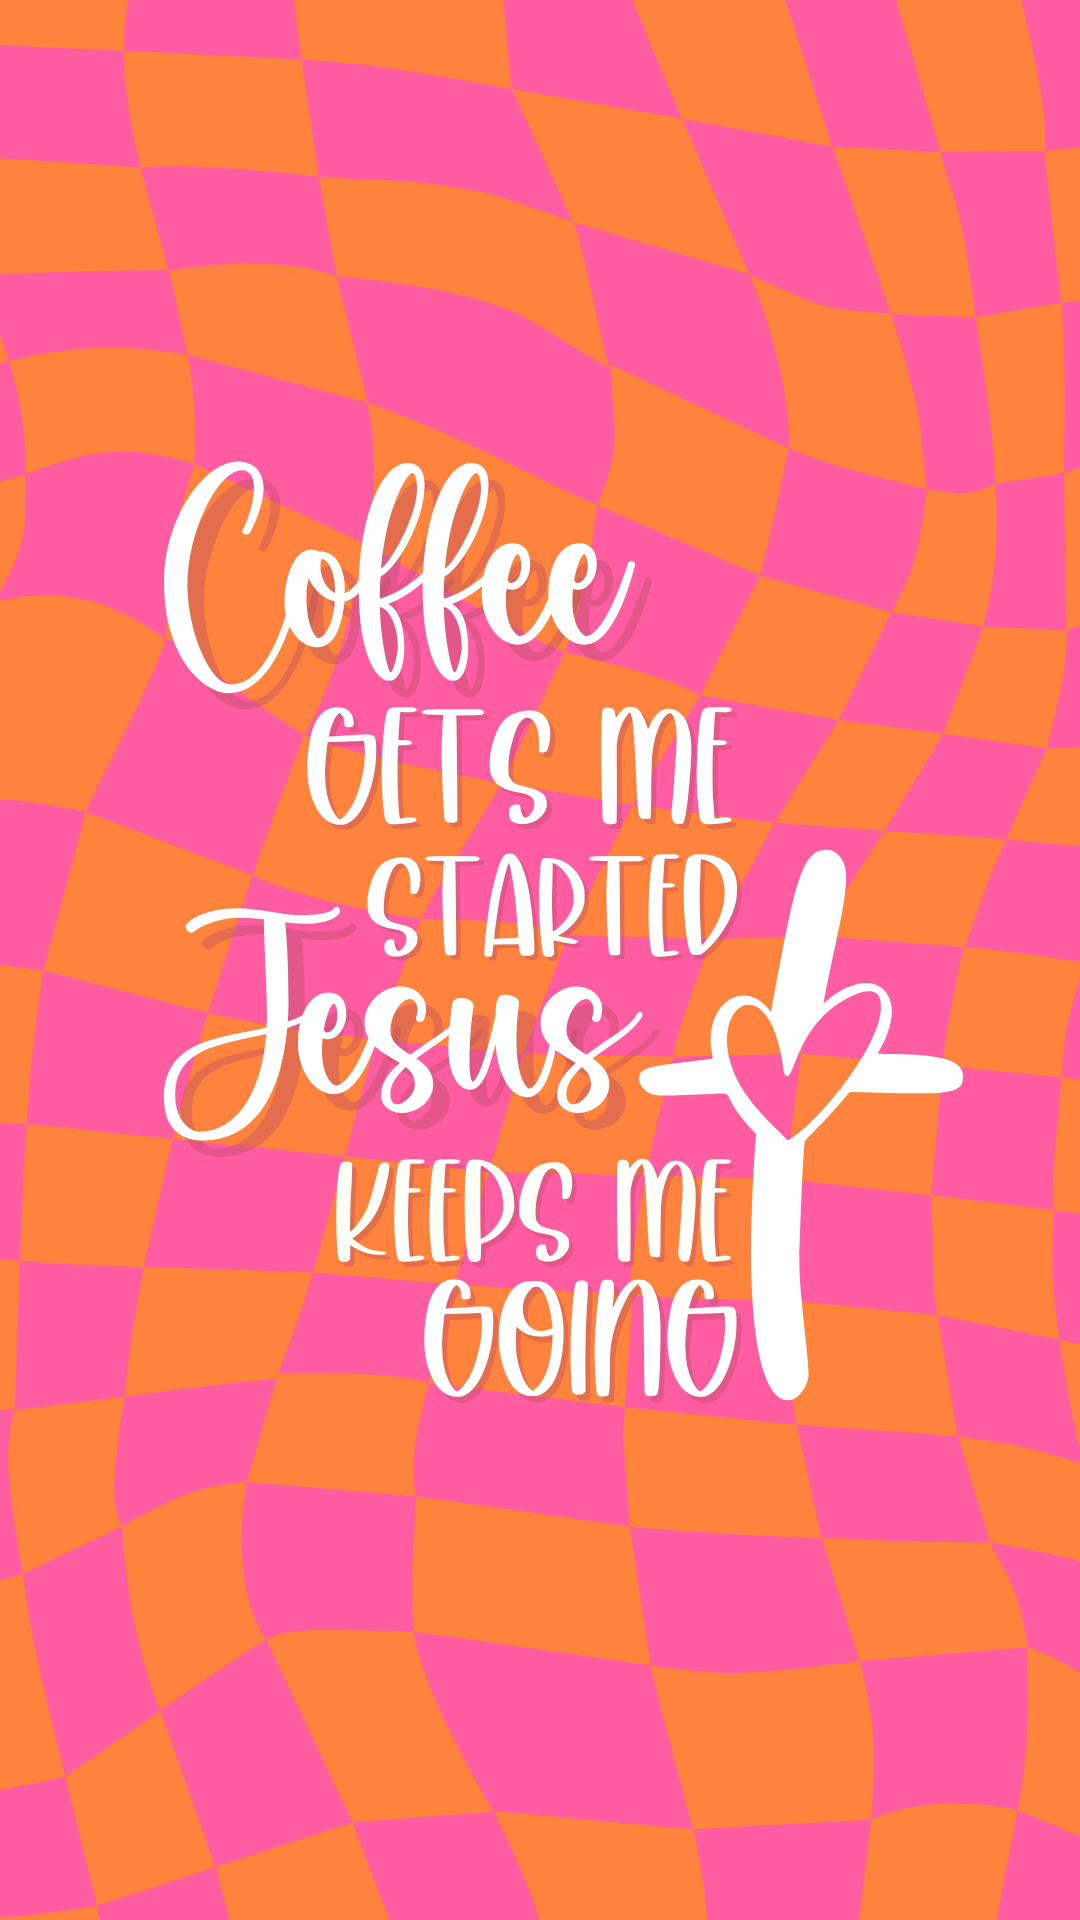 Coffee gets me started, Jesus keeps me going.